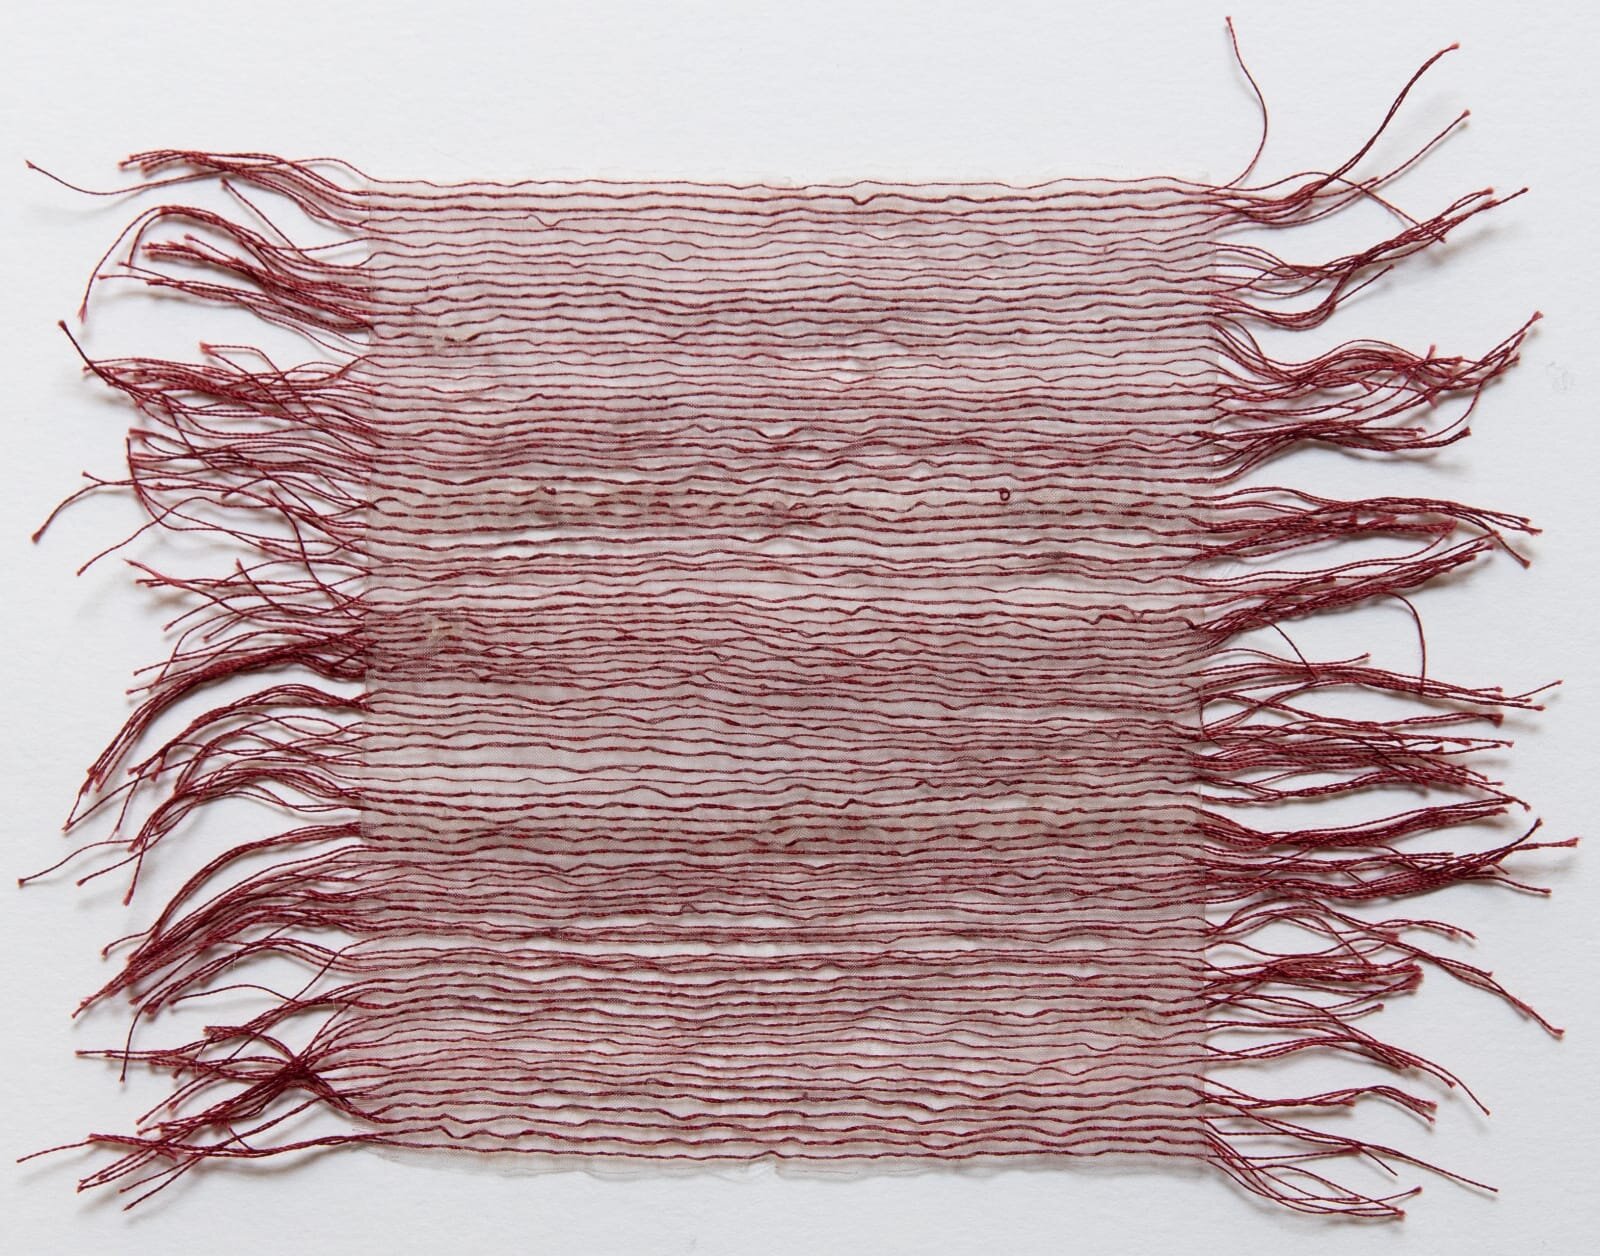  Untitled (Our Black Thread), 2021, embroidery on organza teabags in wooden frame, 44 x 38 cm   